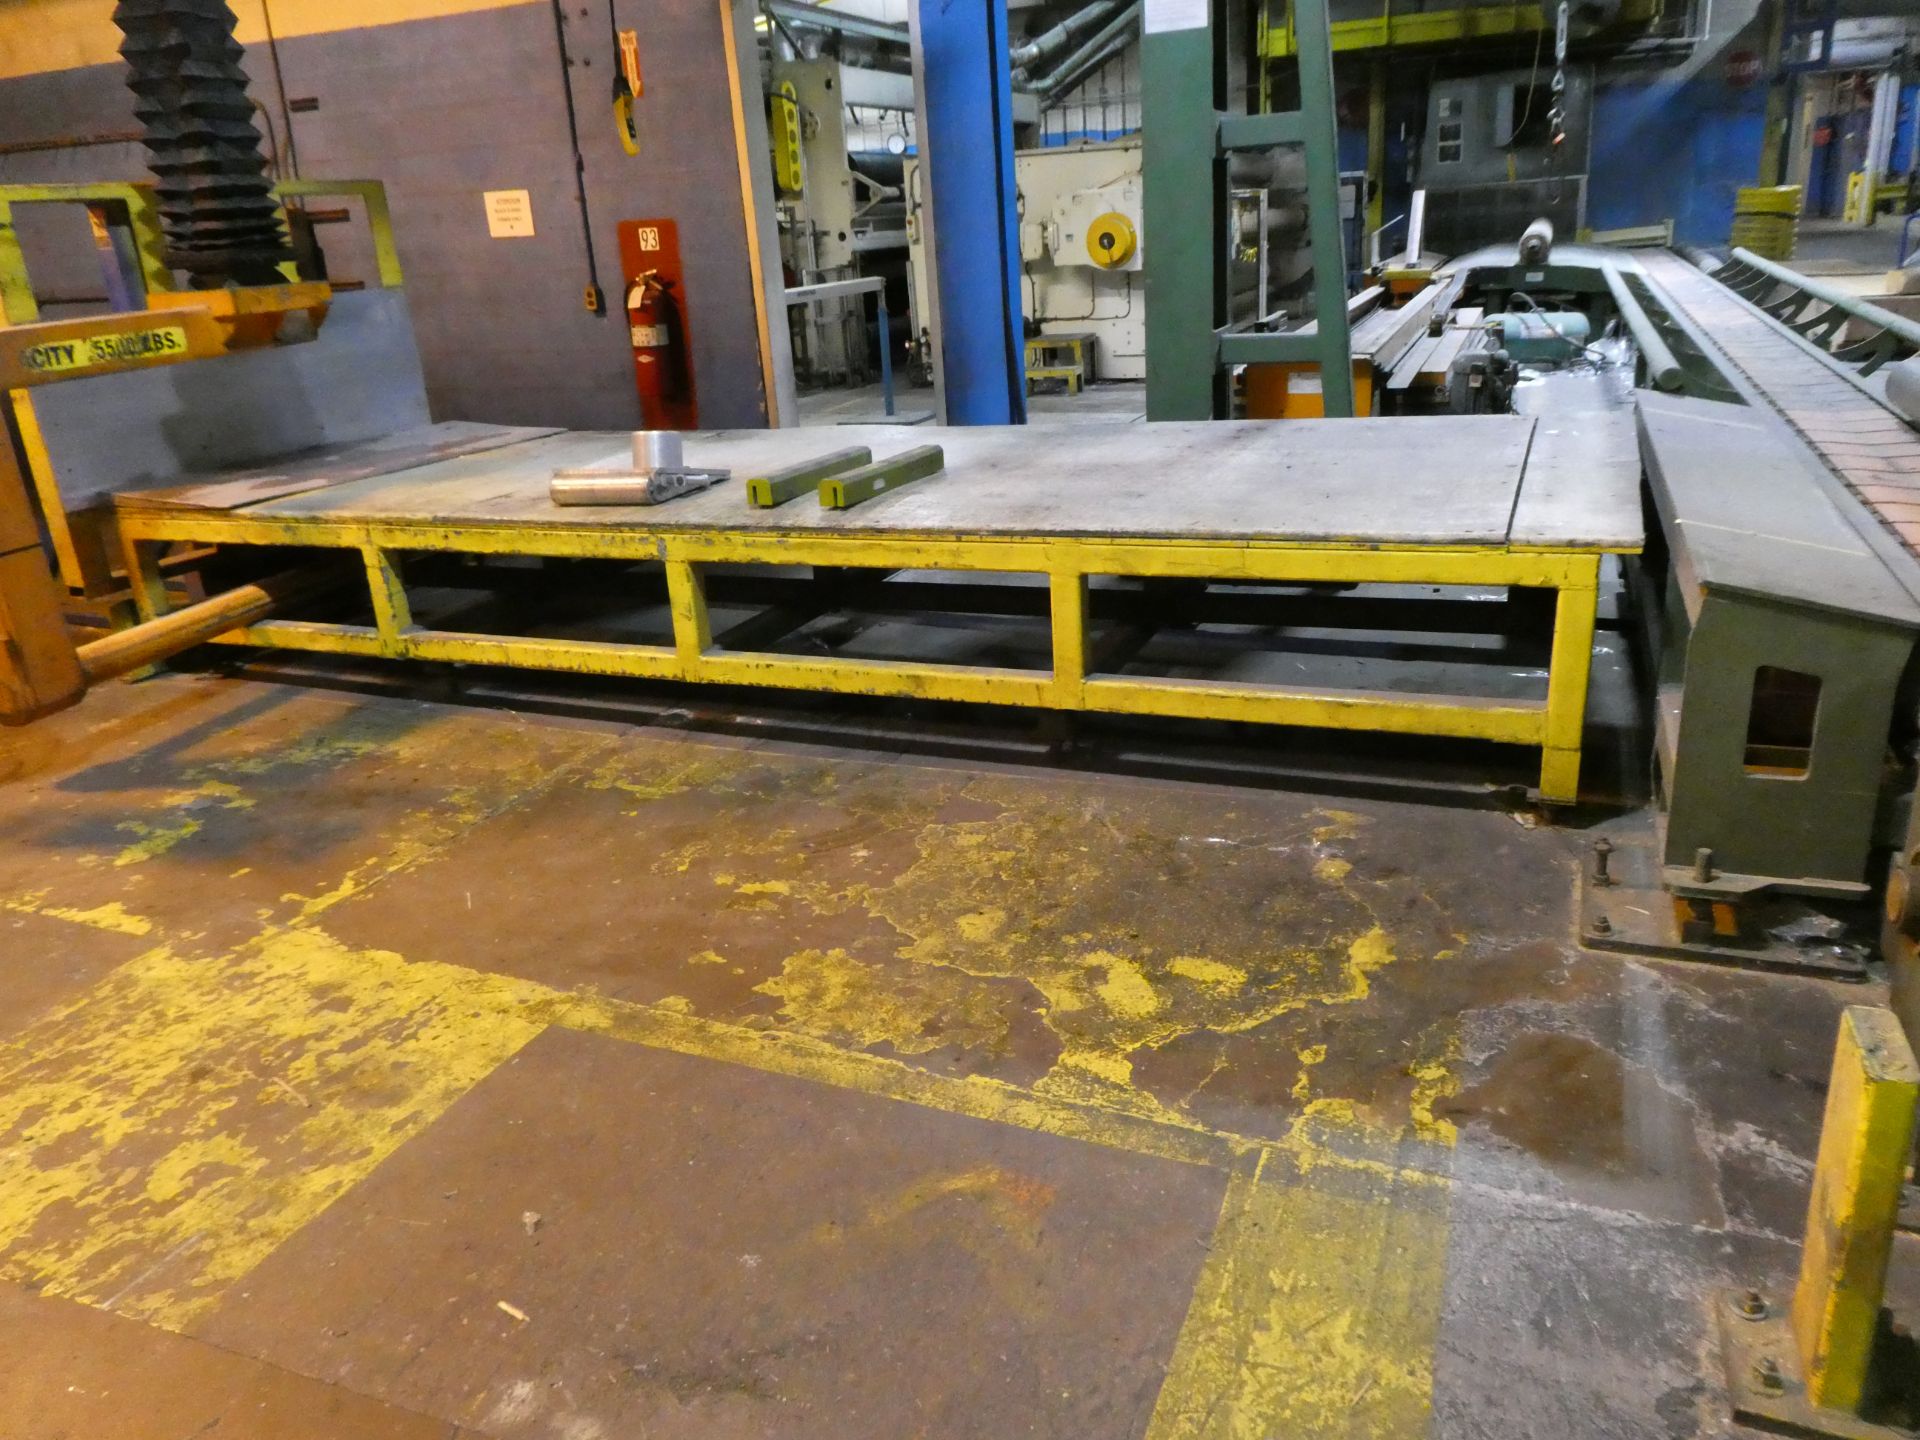 Automatic Handling Roll Handling System - Image 9 of 9